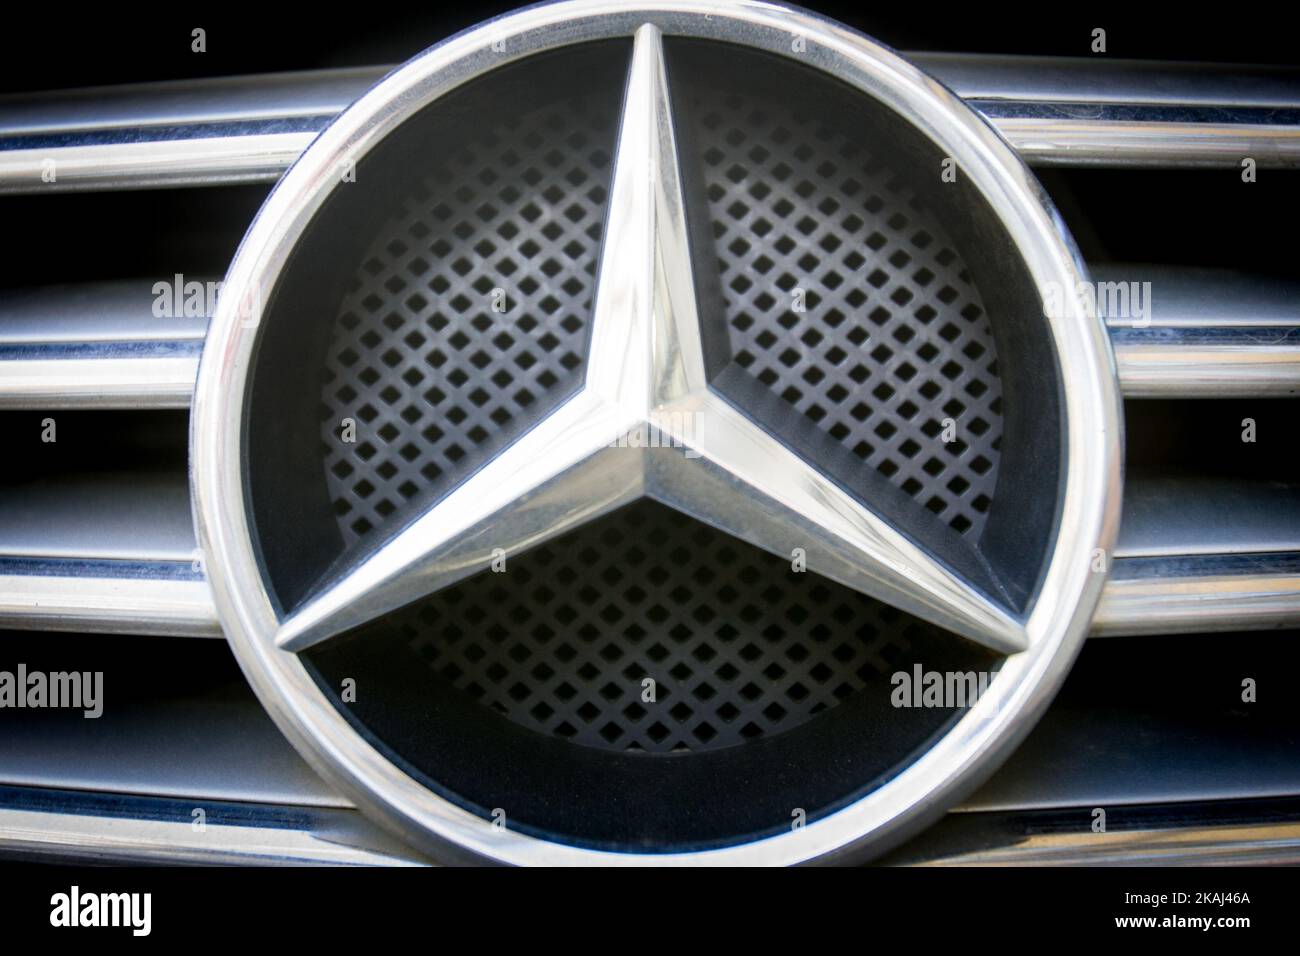 A Mercedes-Benz hood ornament. Daimler is said to favor Poland over Slovakia and Russia for the construction of a new car plant. Hungary has also been named as a potential candidate. Polish officials so far have given no leads on the upcoming project which could bring a thousand jobs to the country.  Stock Photo